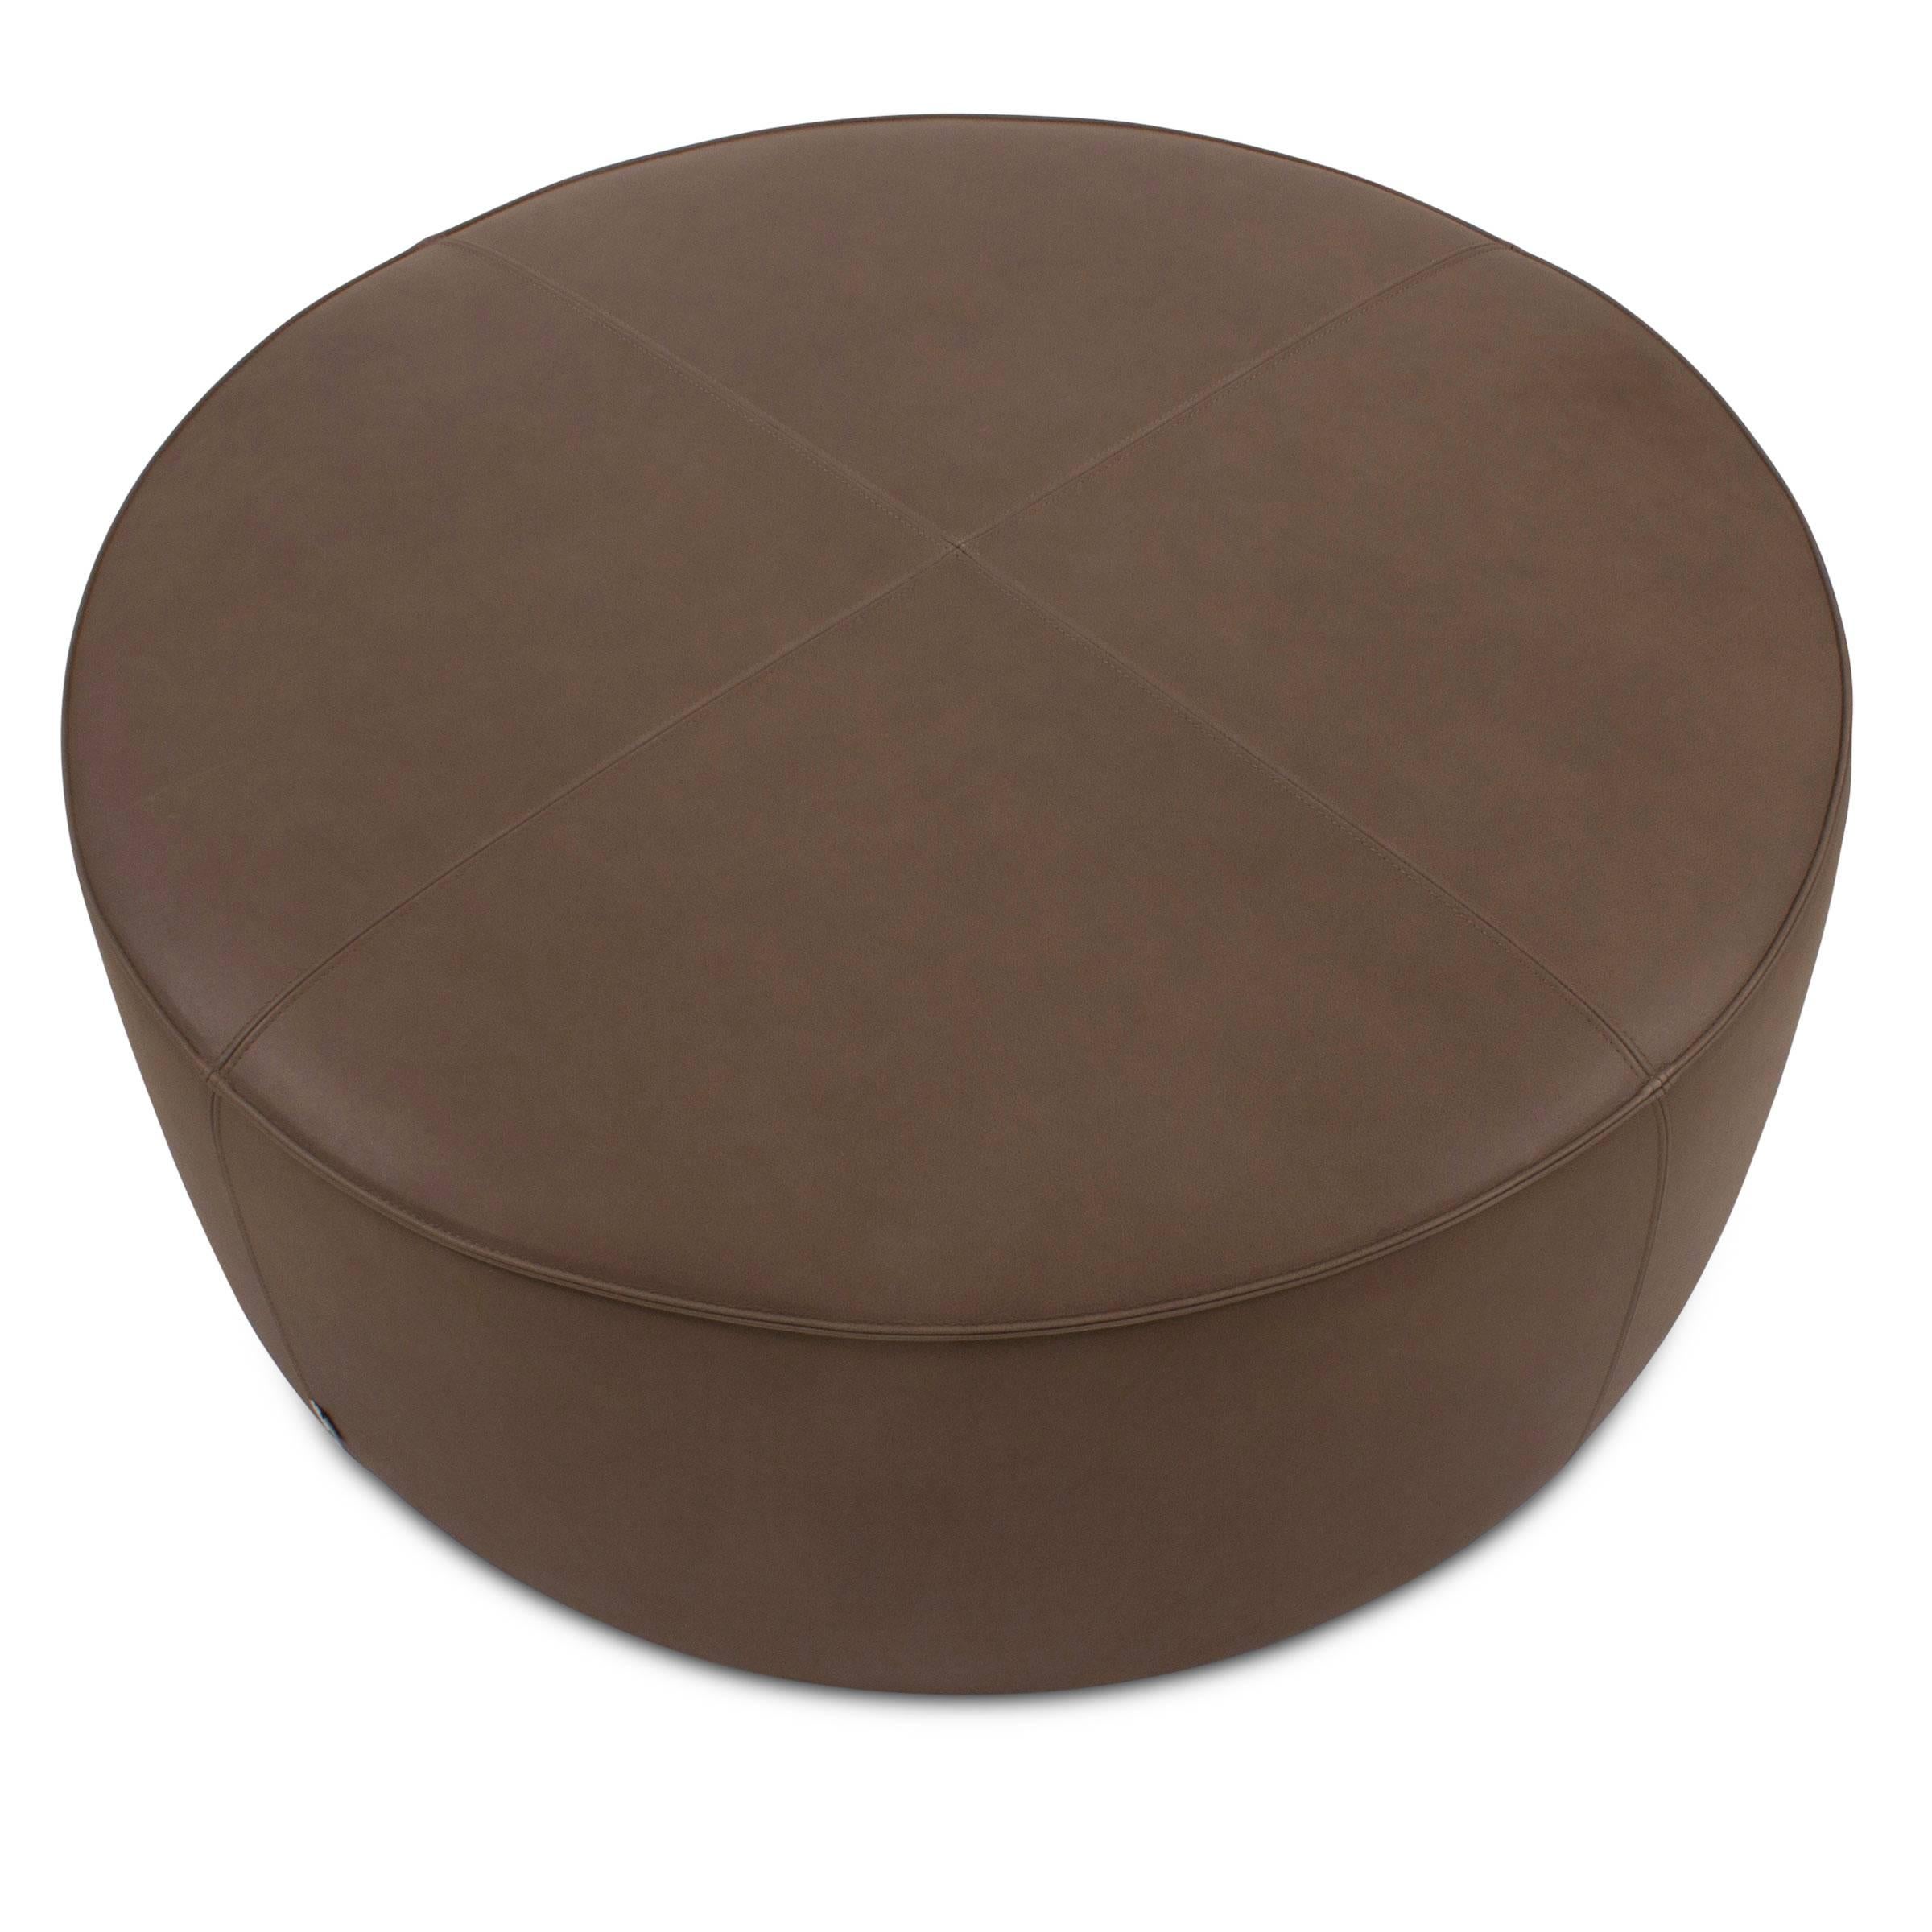 Designed by Nicola Gallizia to be inserted into each other, these poufs allow for multiple compositions.